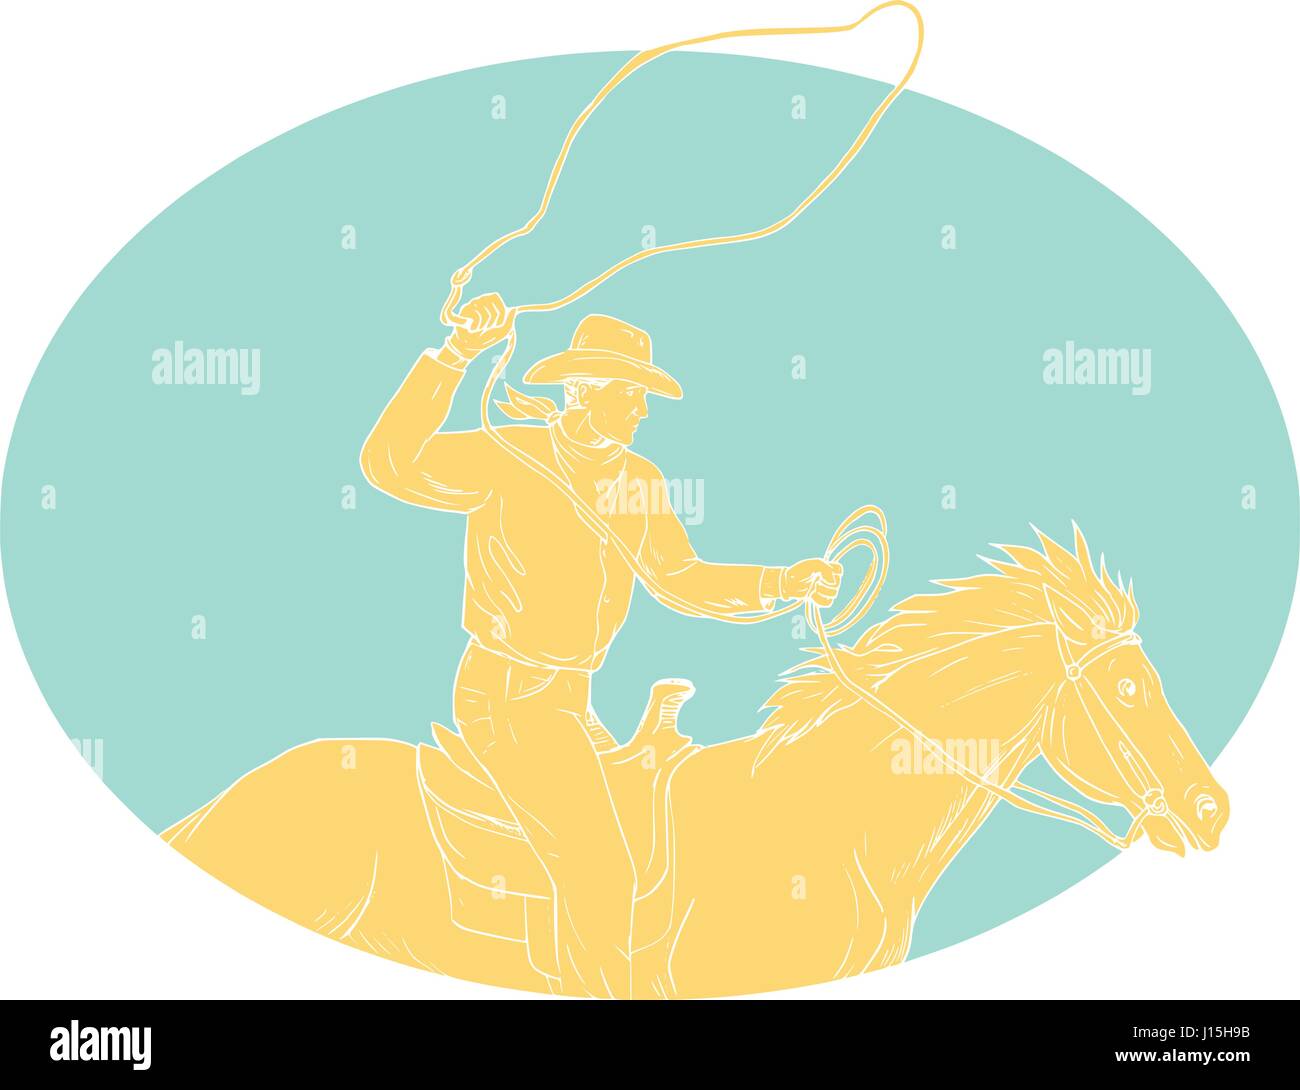 Drawing sketch style illustration of a cowboy holding lasso riding horse viewed from the side set inside circle on isolated background. Stock Vector